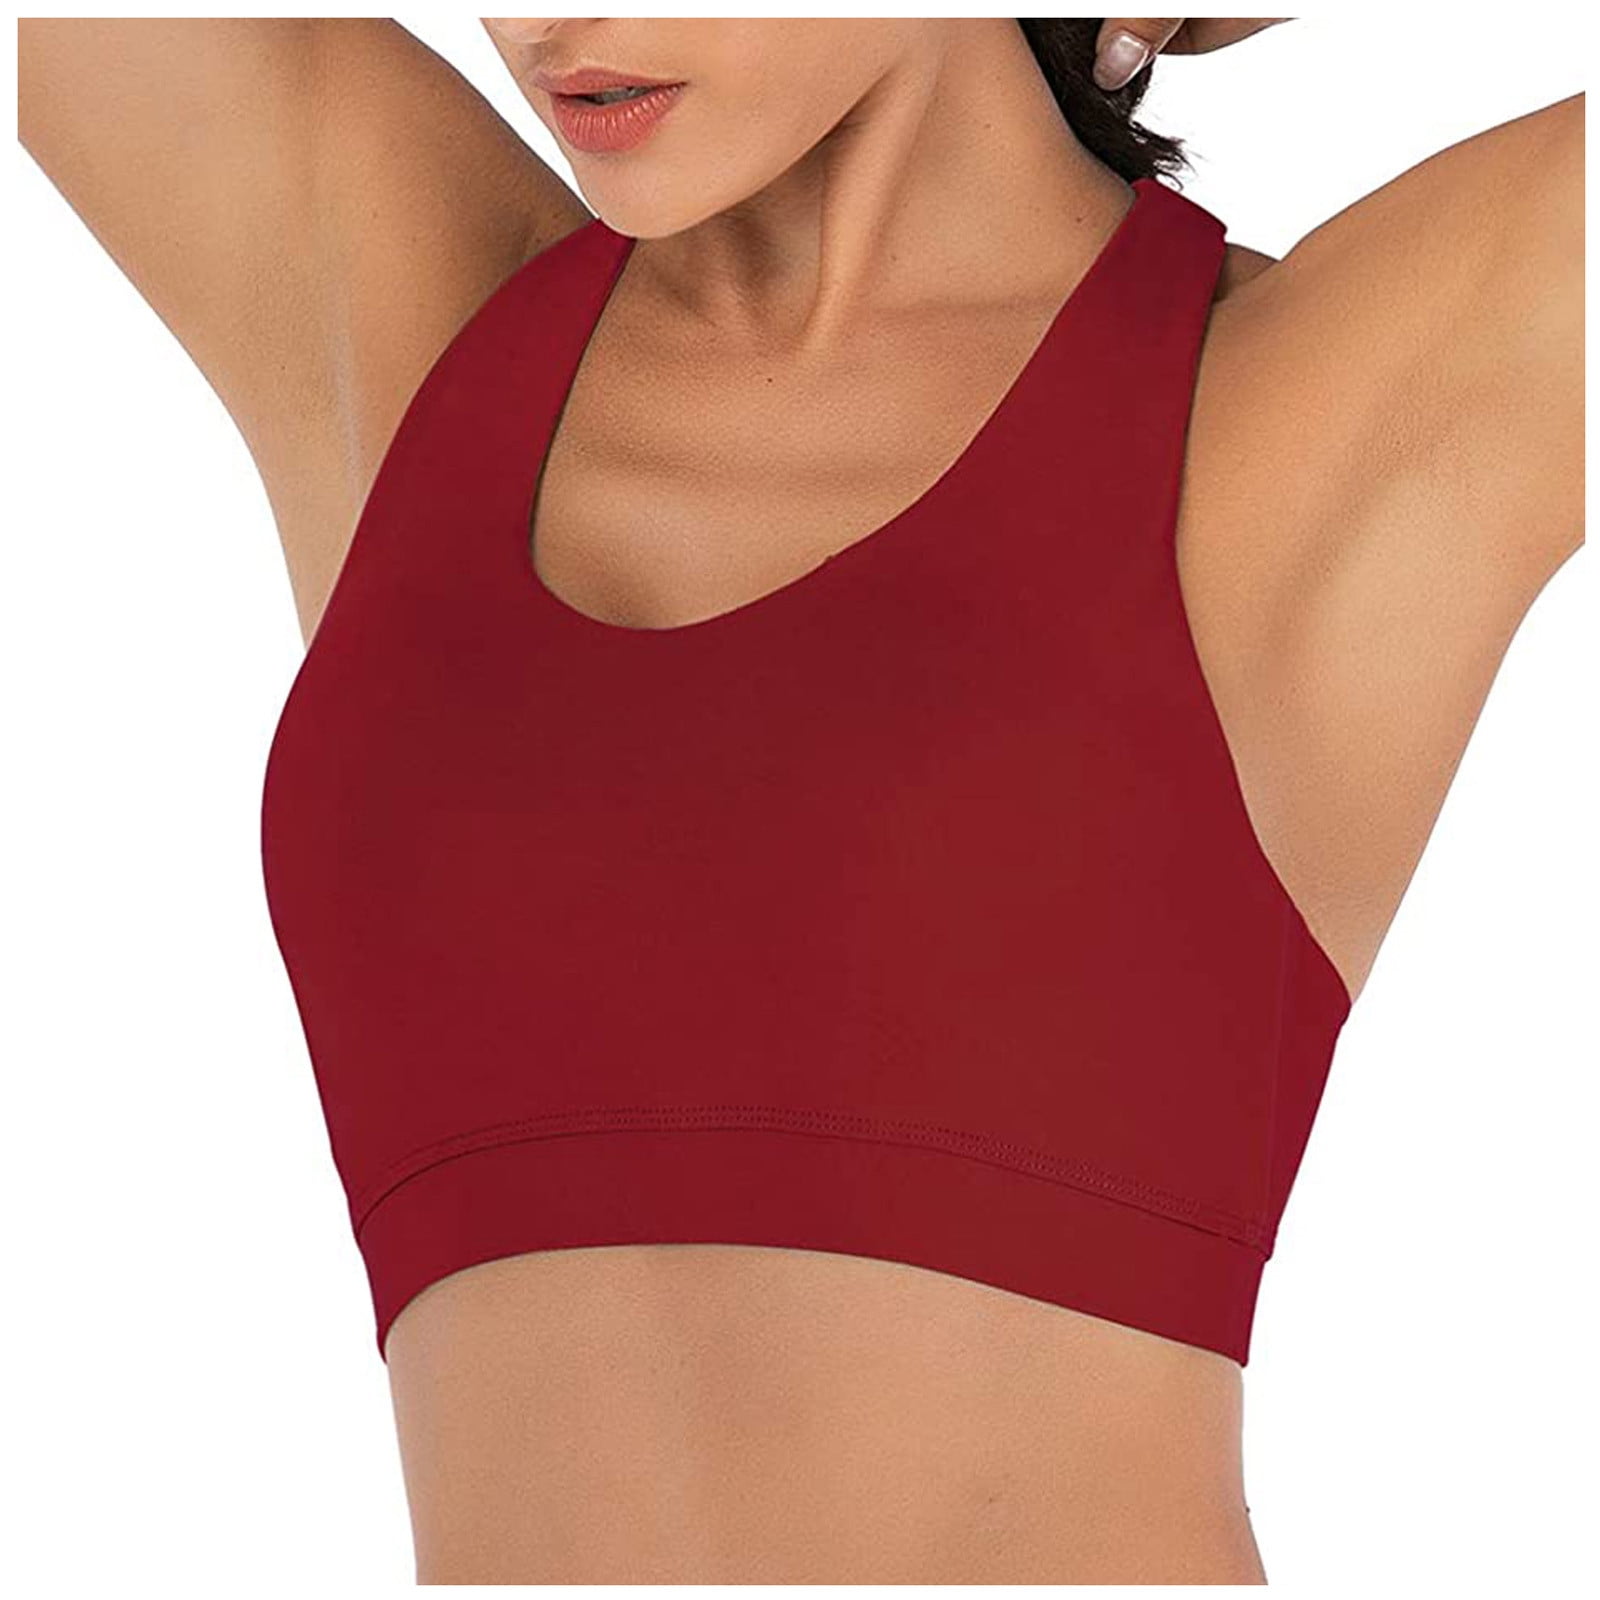 Aueoeo Running Sports Bras for Women, Sports Bra for Big Busted